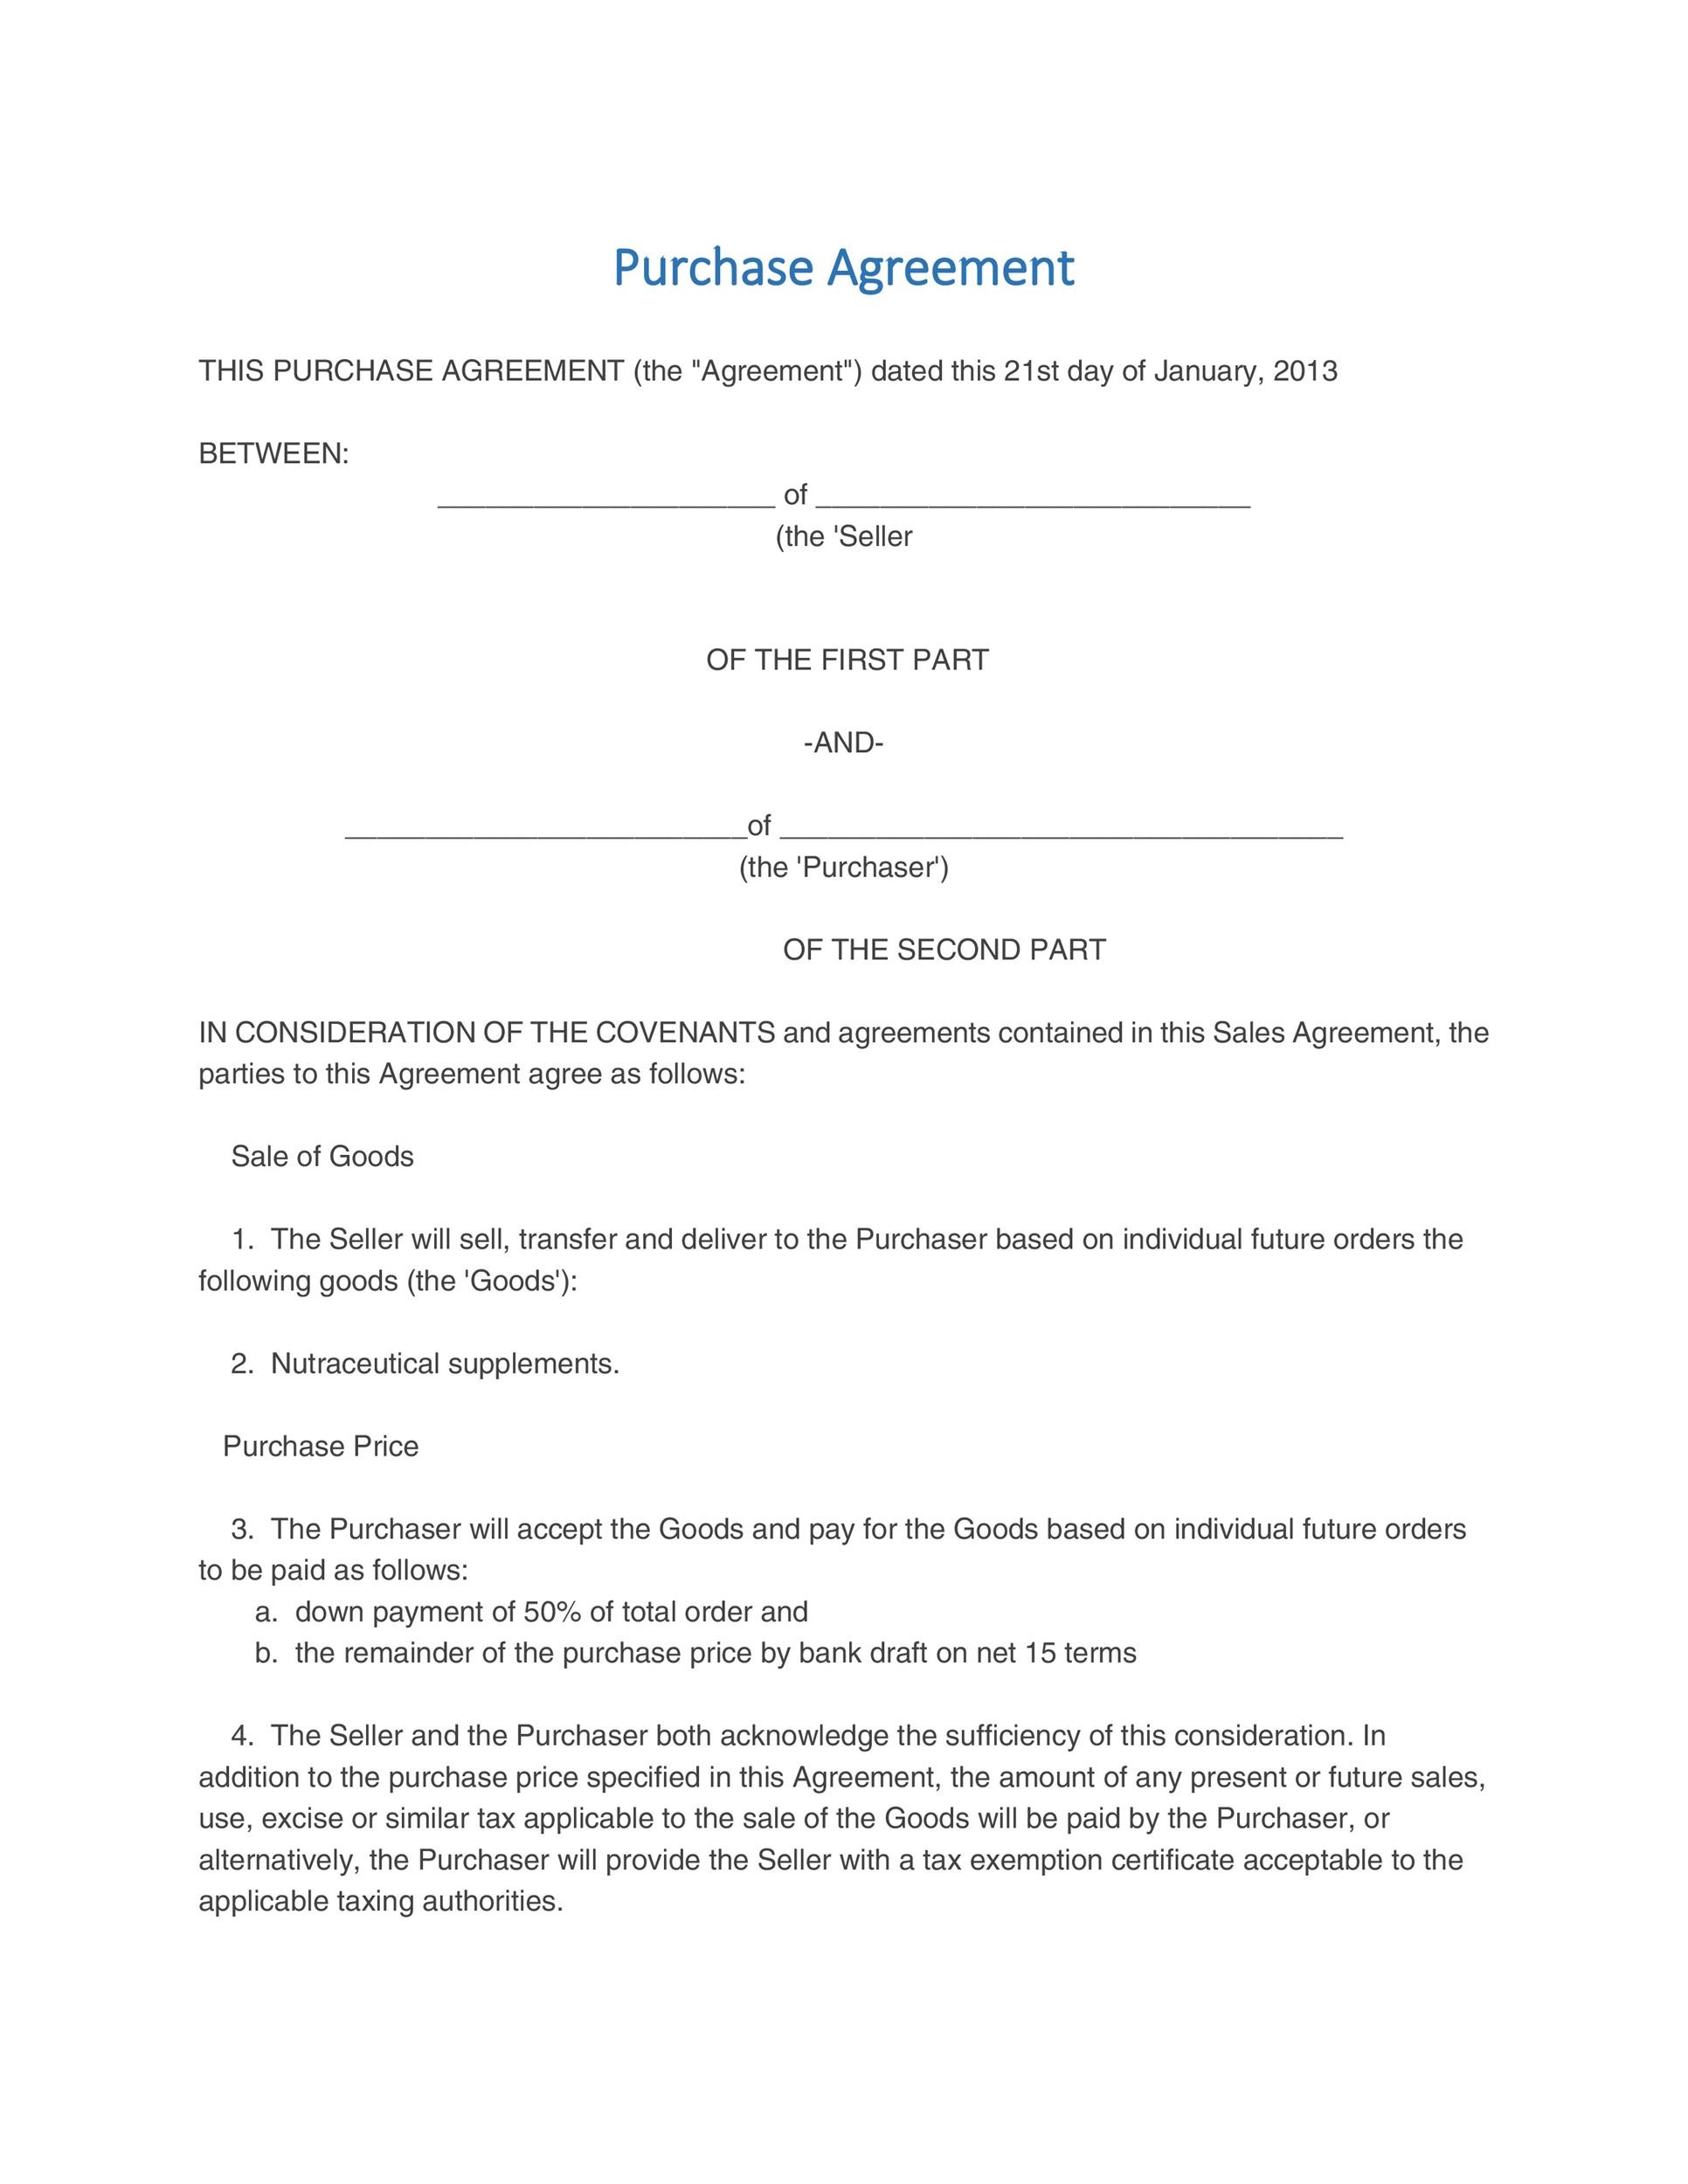 37-simple-purchase-agreement-templates-real-estate-business